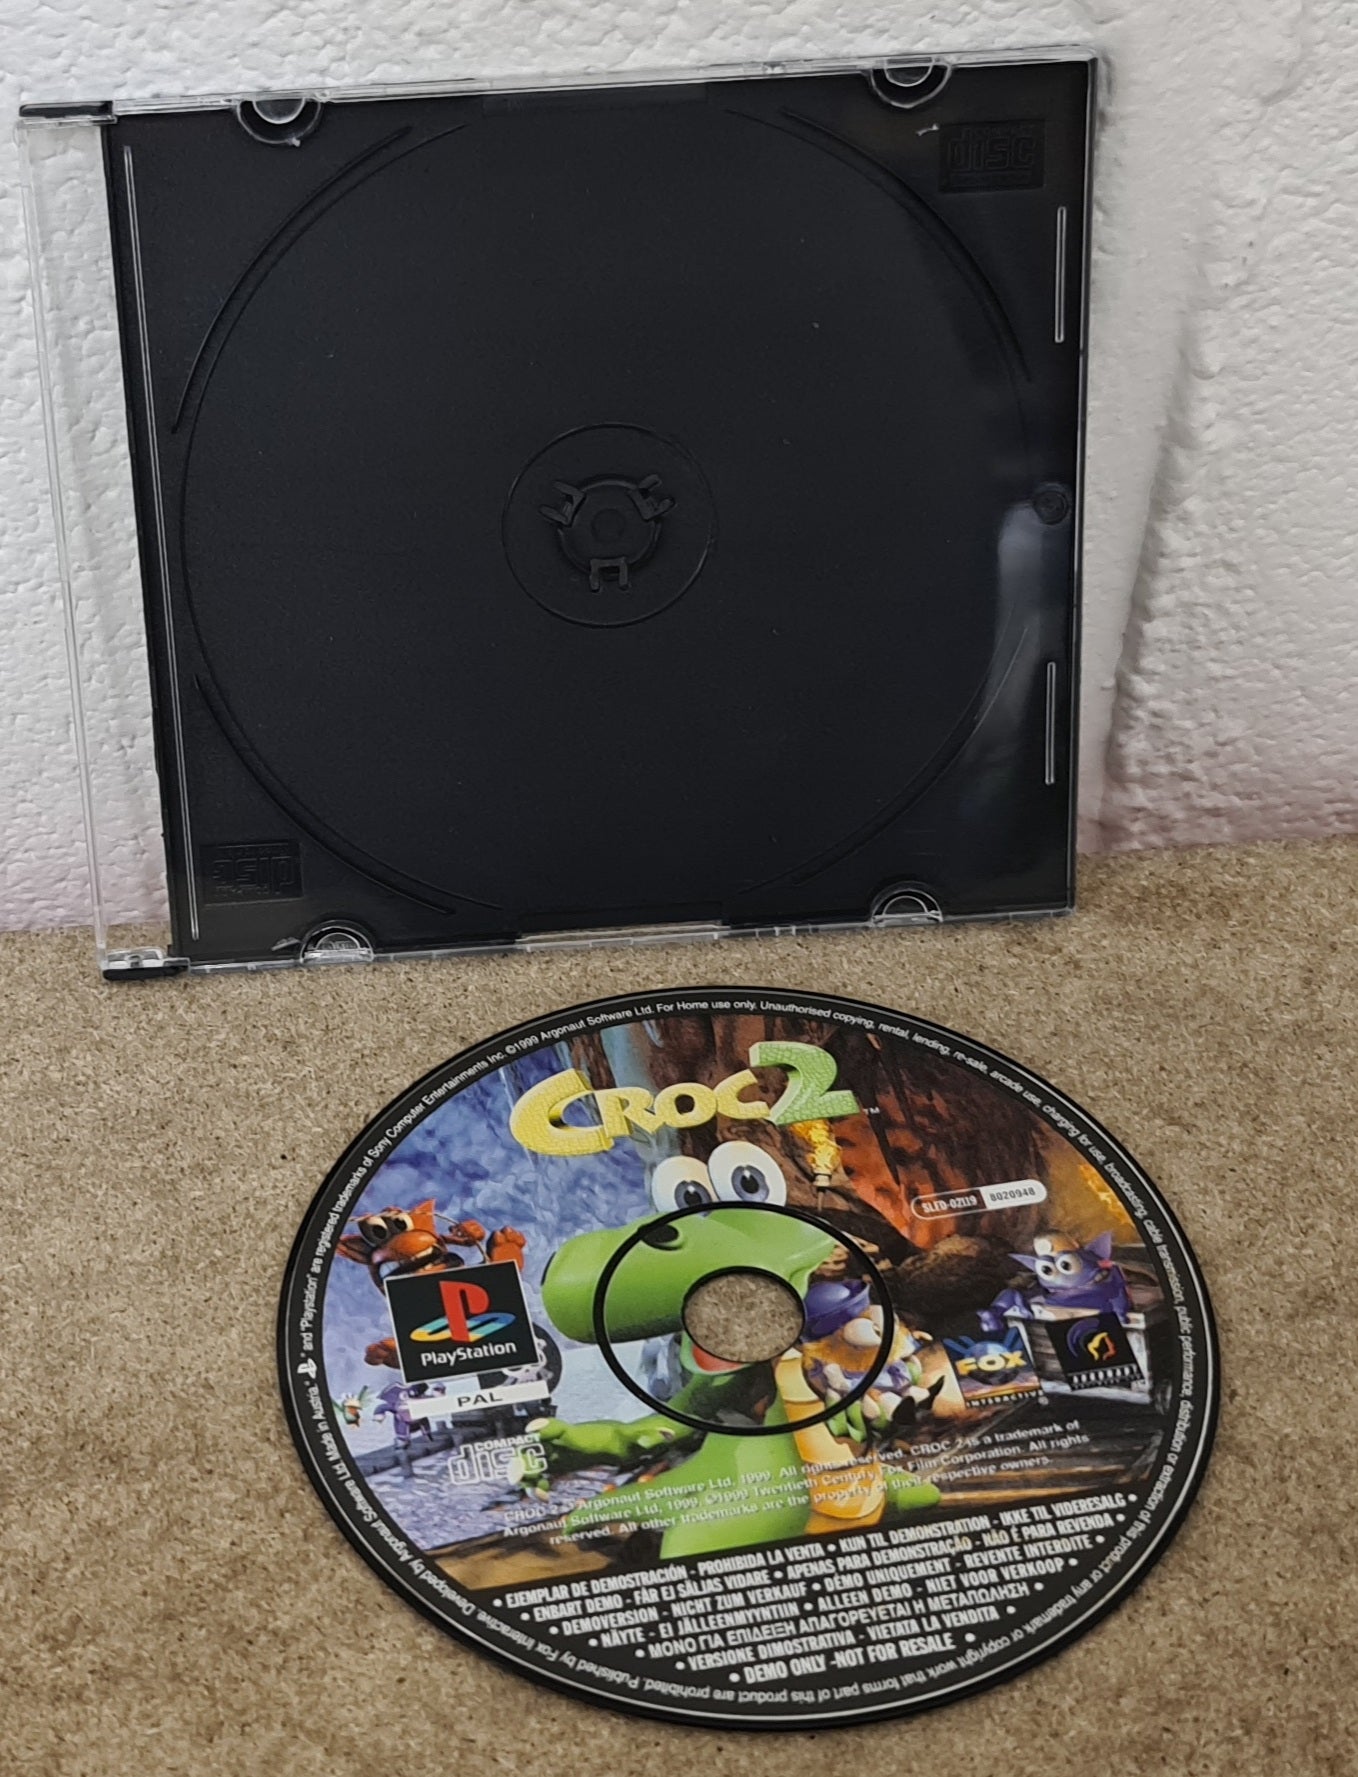 Croc 2 Sony Playstation 1 (PS1) Game Disc Only